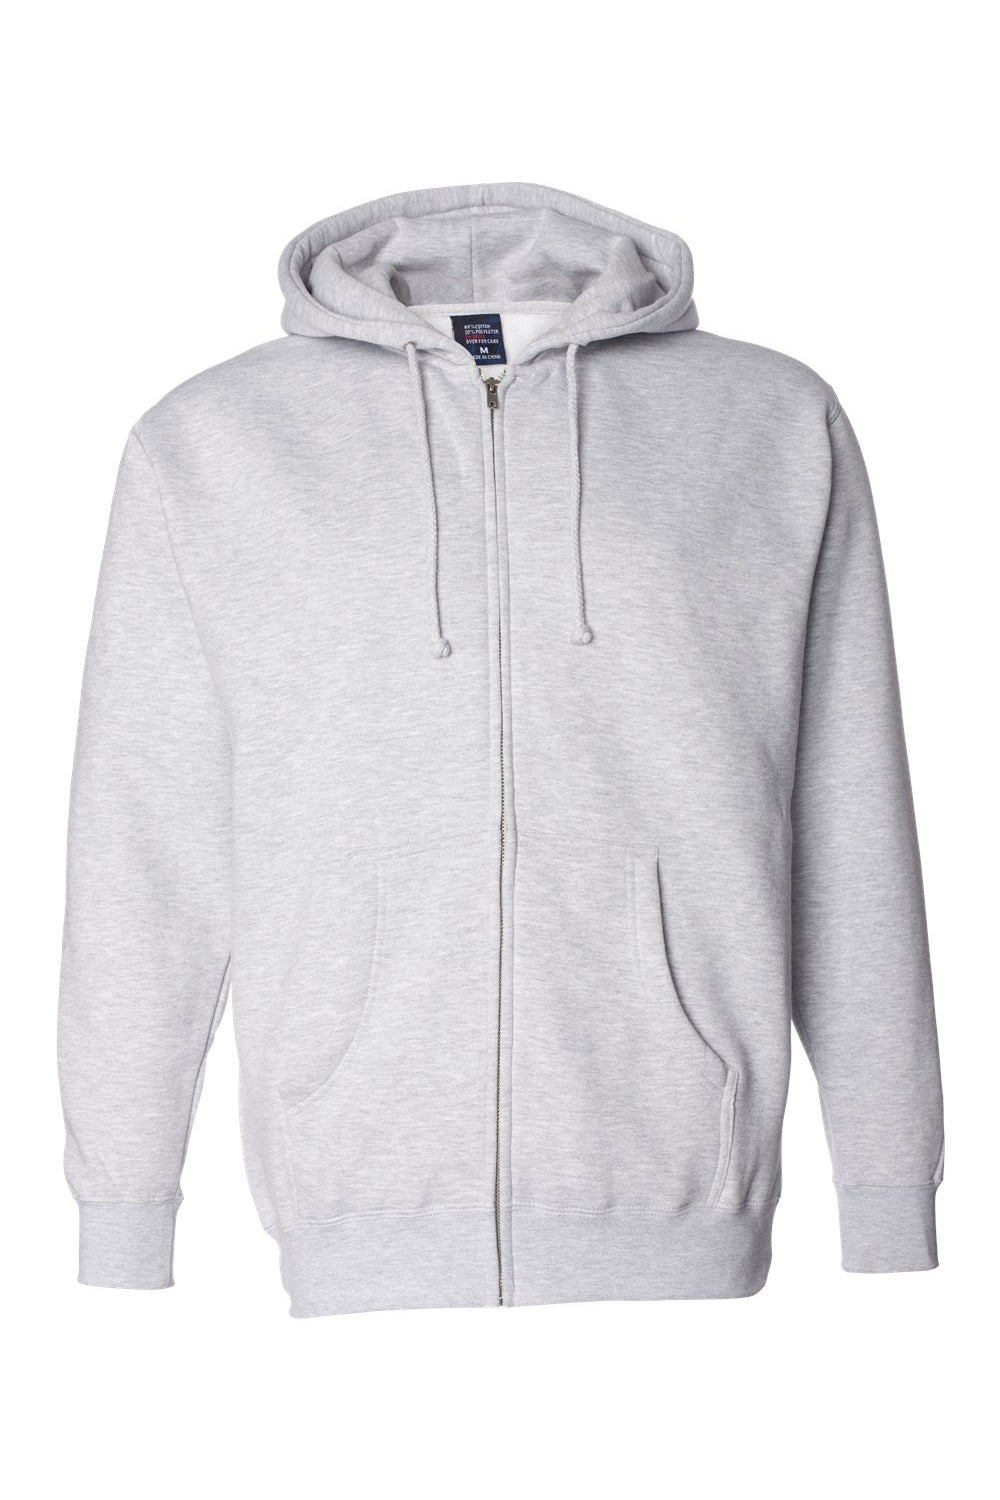 Independent Trading Co. IND4000Z Mens Full Zip Hooded Sweatshirt Hoodie Heather Grey Flat Front